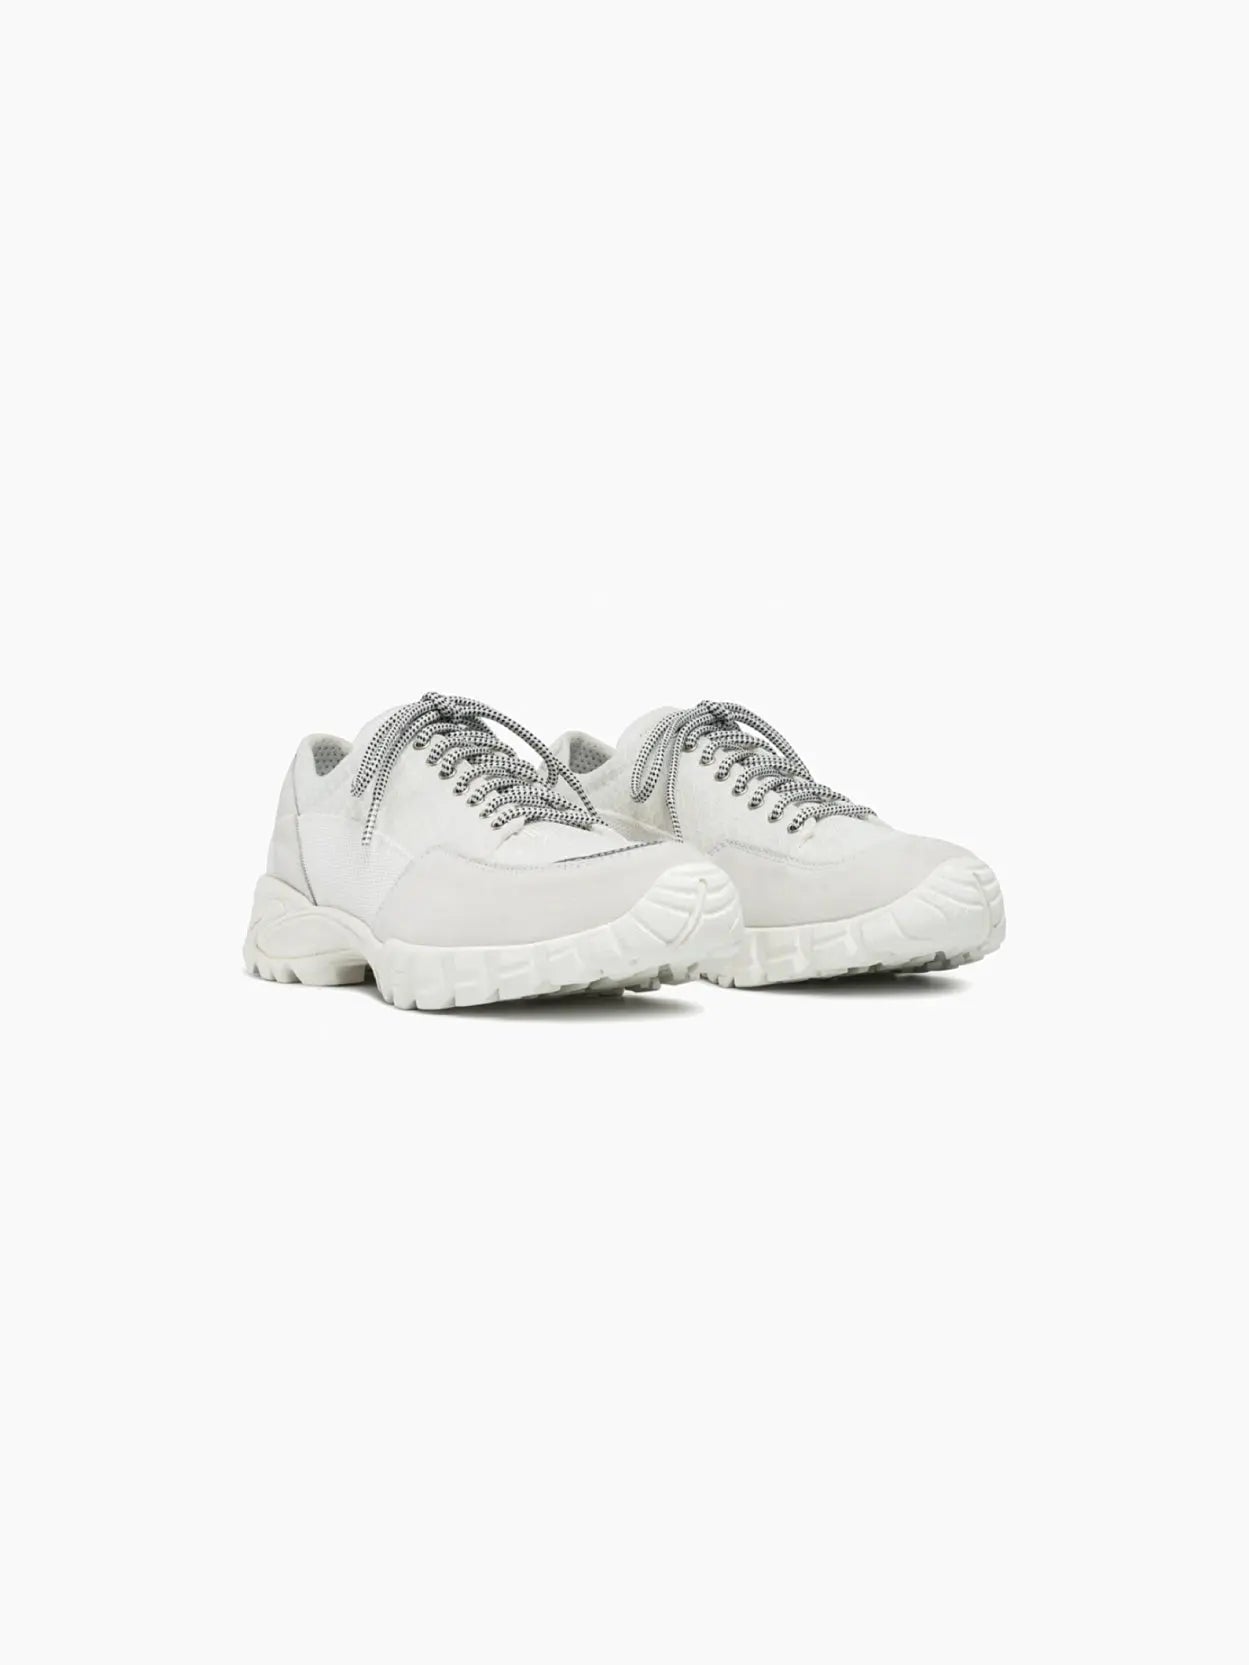 A white athletic shoe with a textured fabric upper and chunky sole, available exclusively at Bassalstore. The Possagno White Suede by Diemme features a lace-up design with grey laces and subtle decorative stitching. The sole has a rugged tread pattern for grip, echoing the dynamic energy of Barcelona's bustling streets.